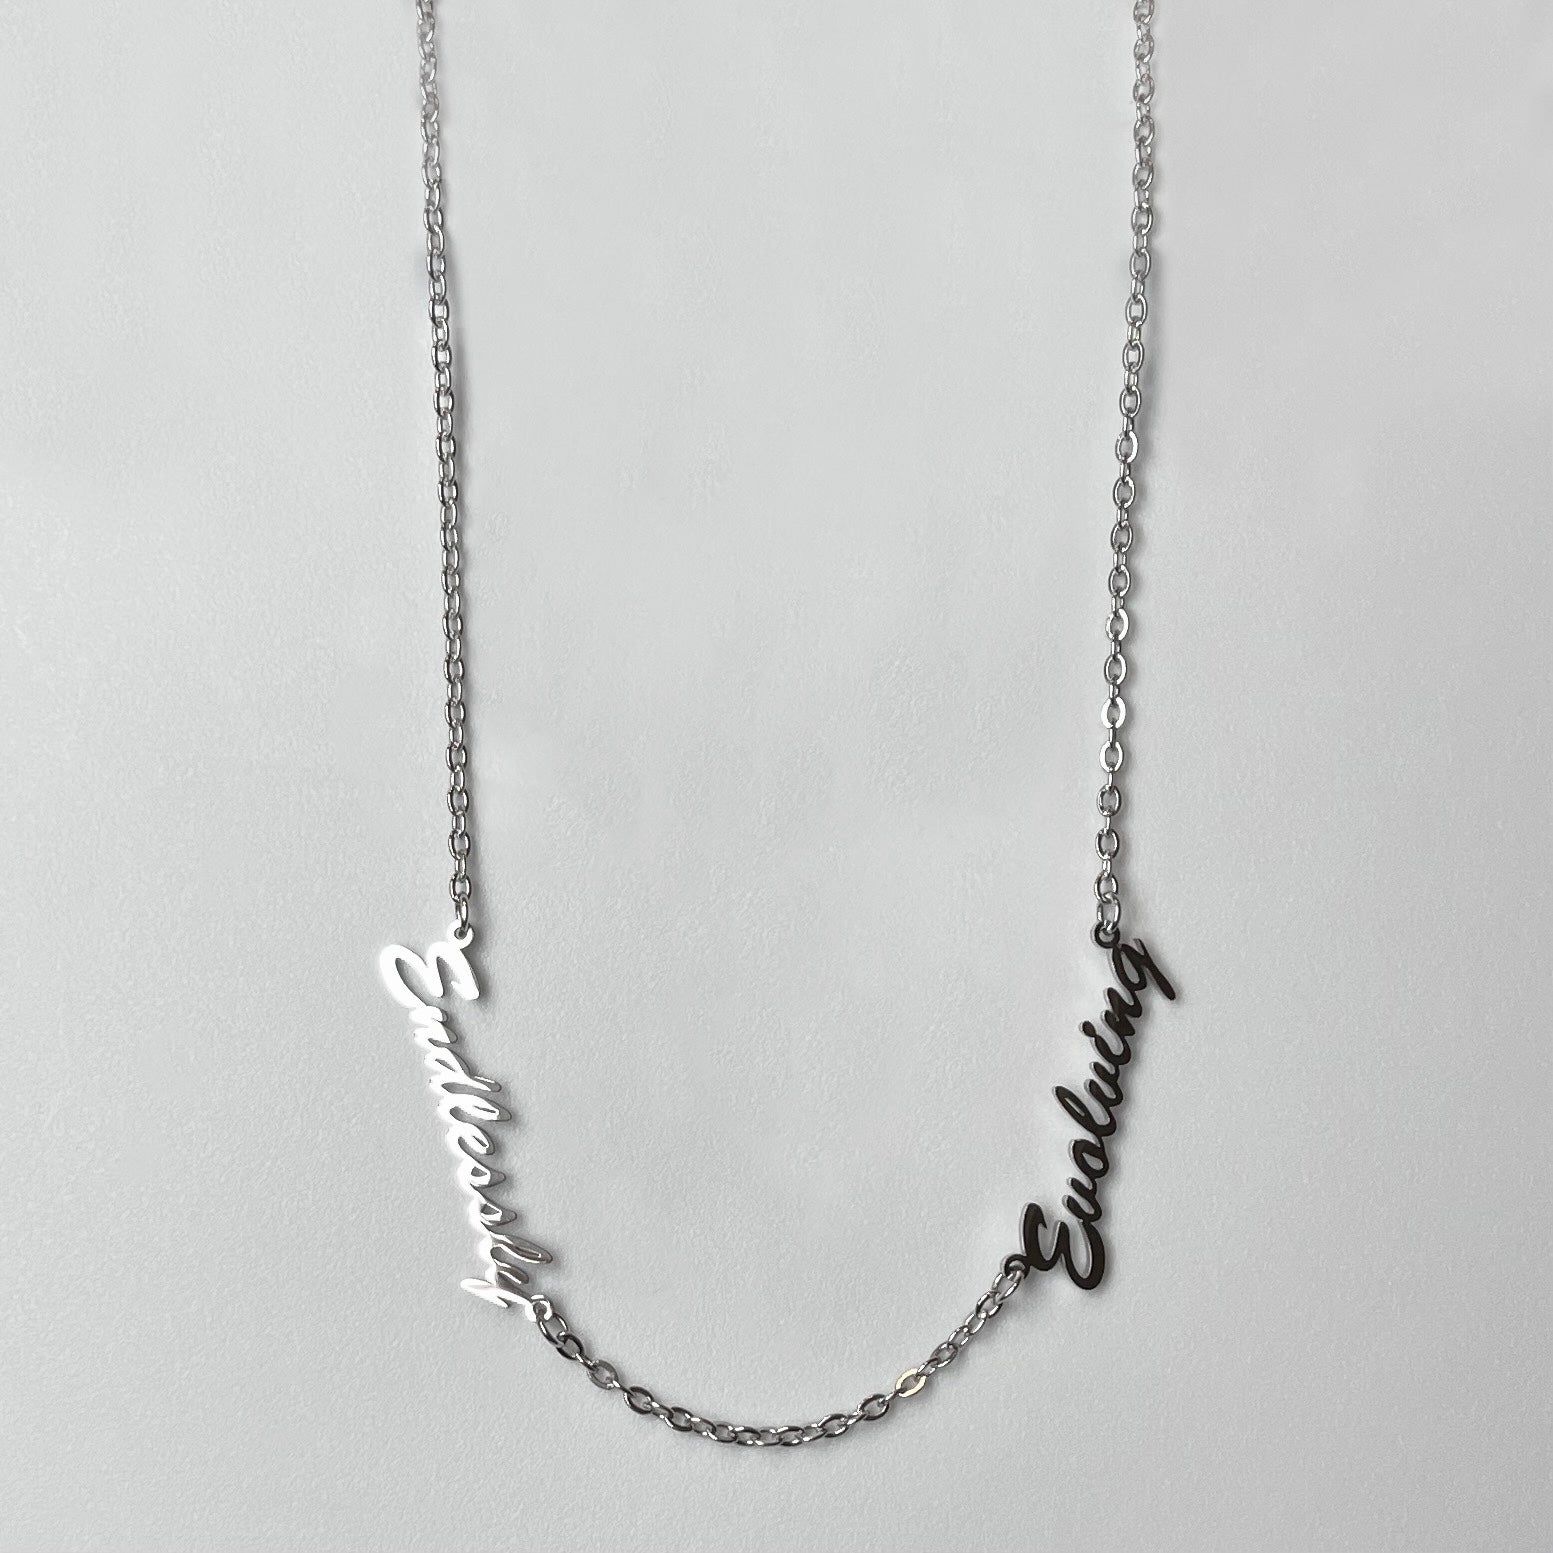 Endlessly Evolving Classic Necklace